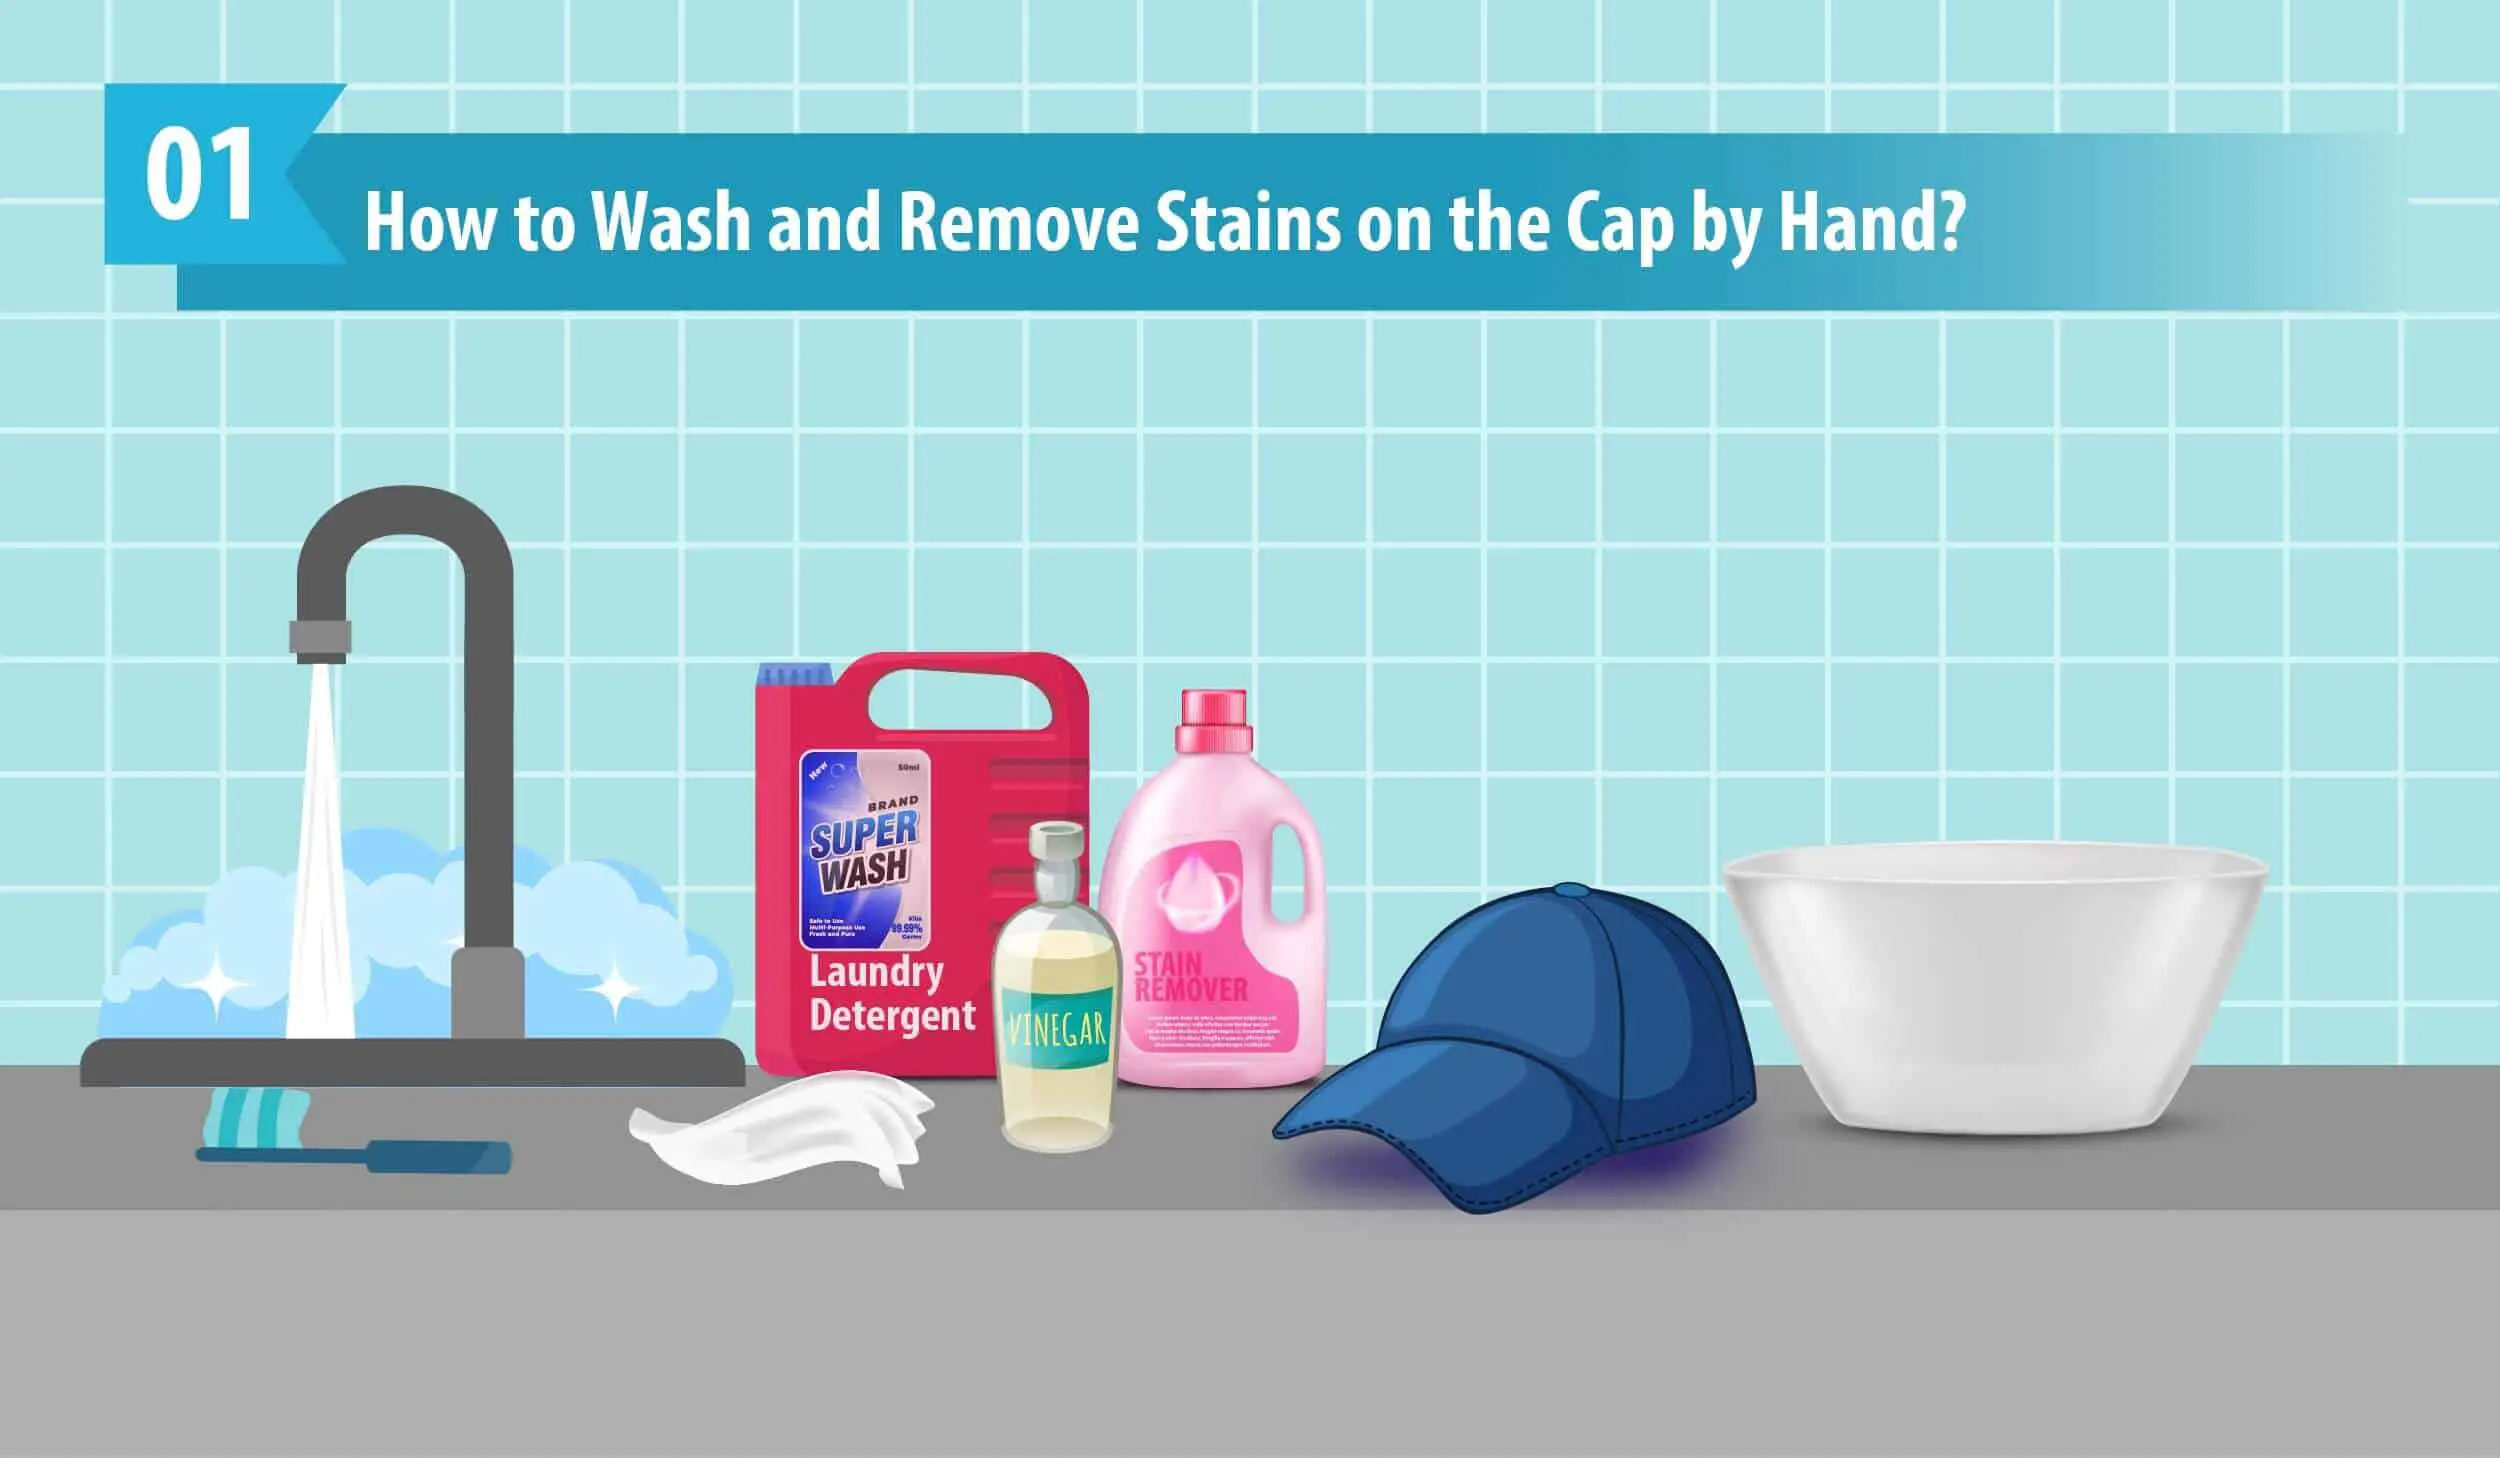 How to Wash and Remove Stains on the Cap by Hand